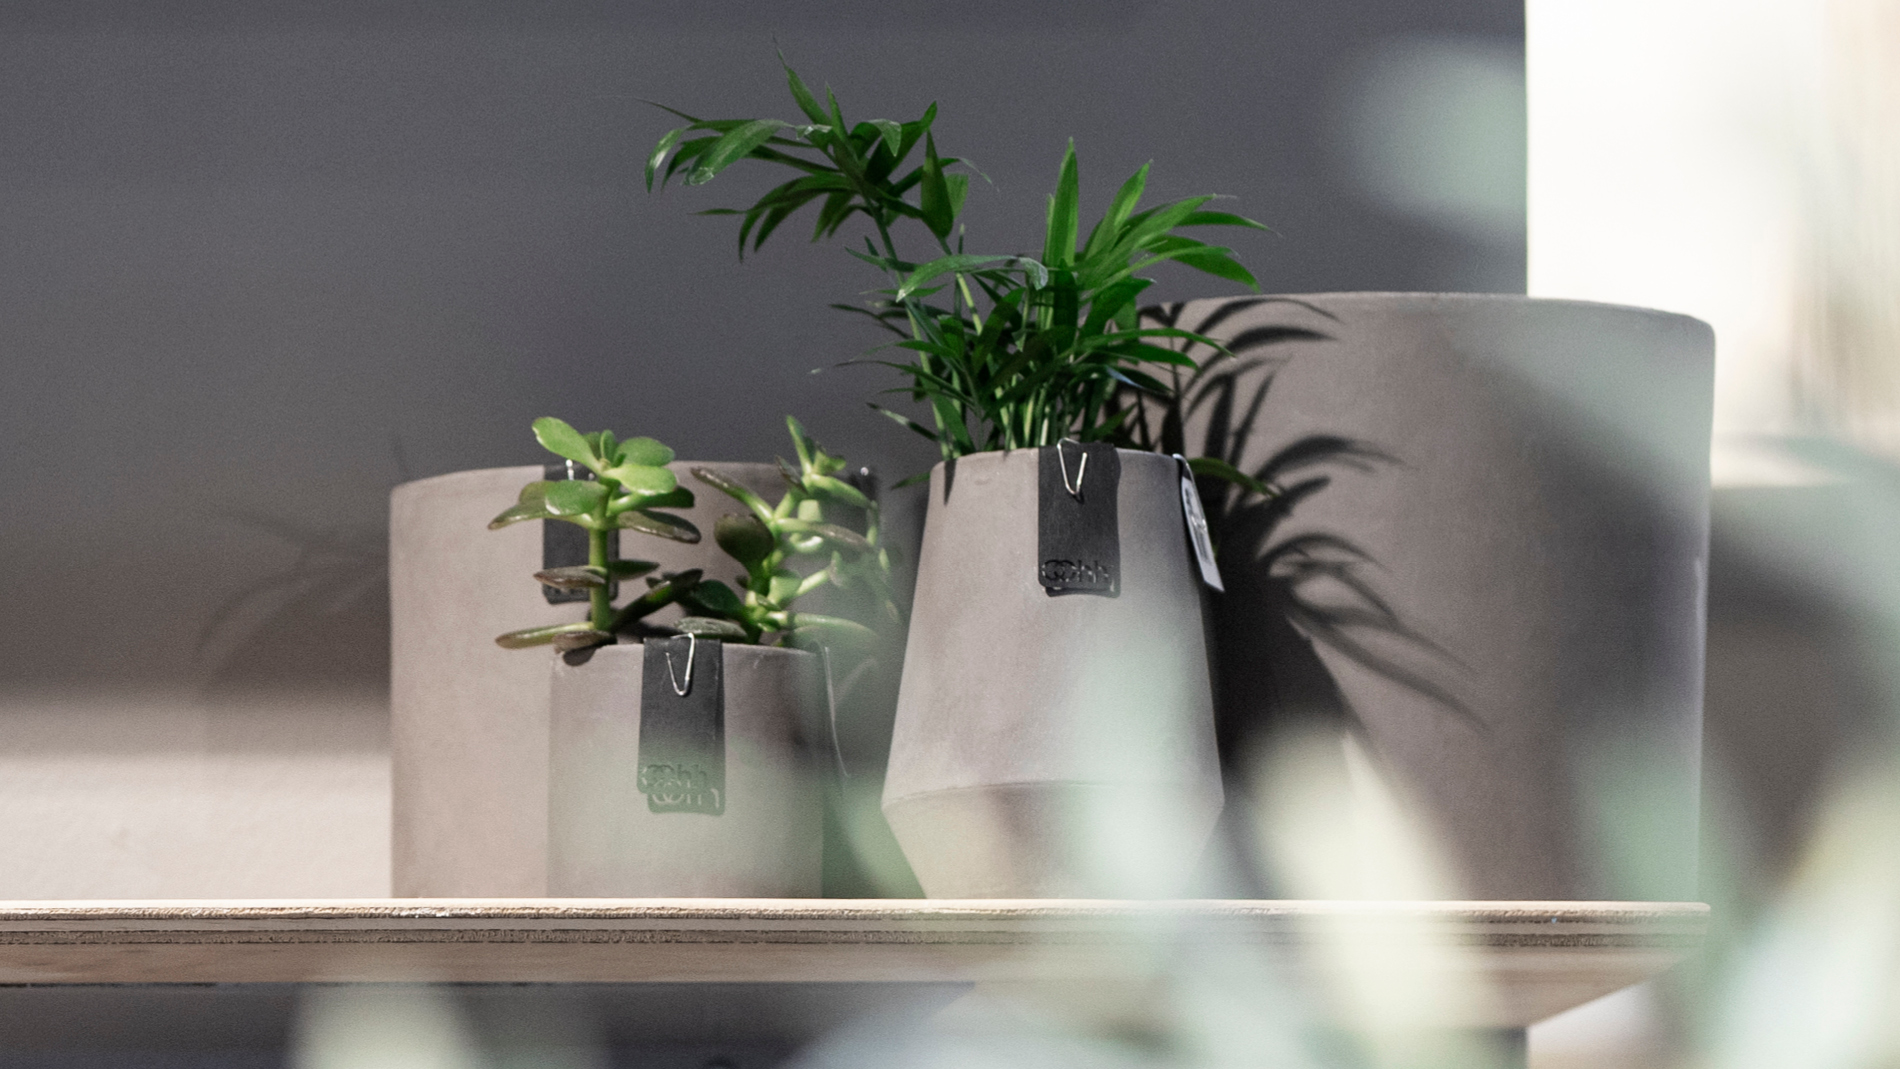 Contract Business: Vases at Ambiente